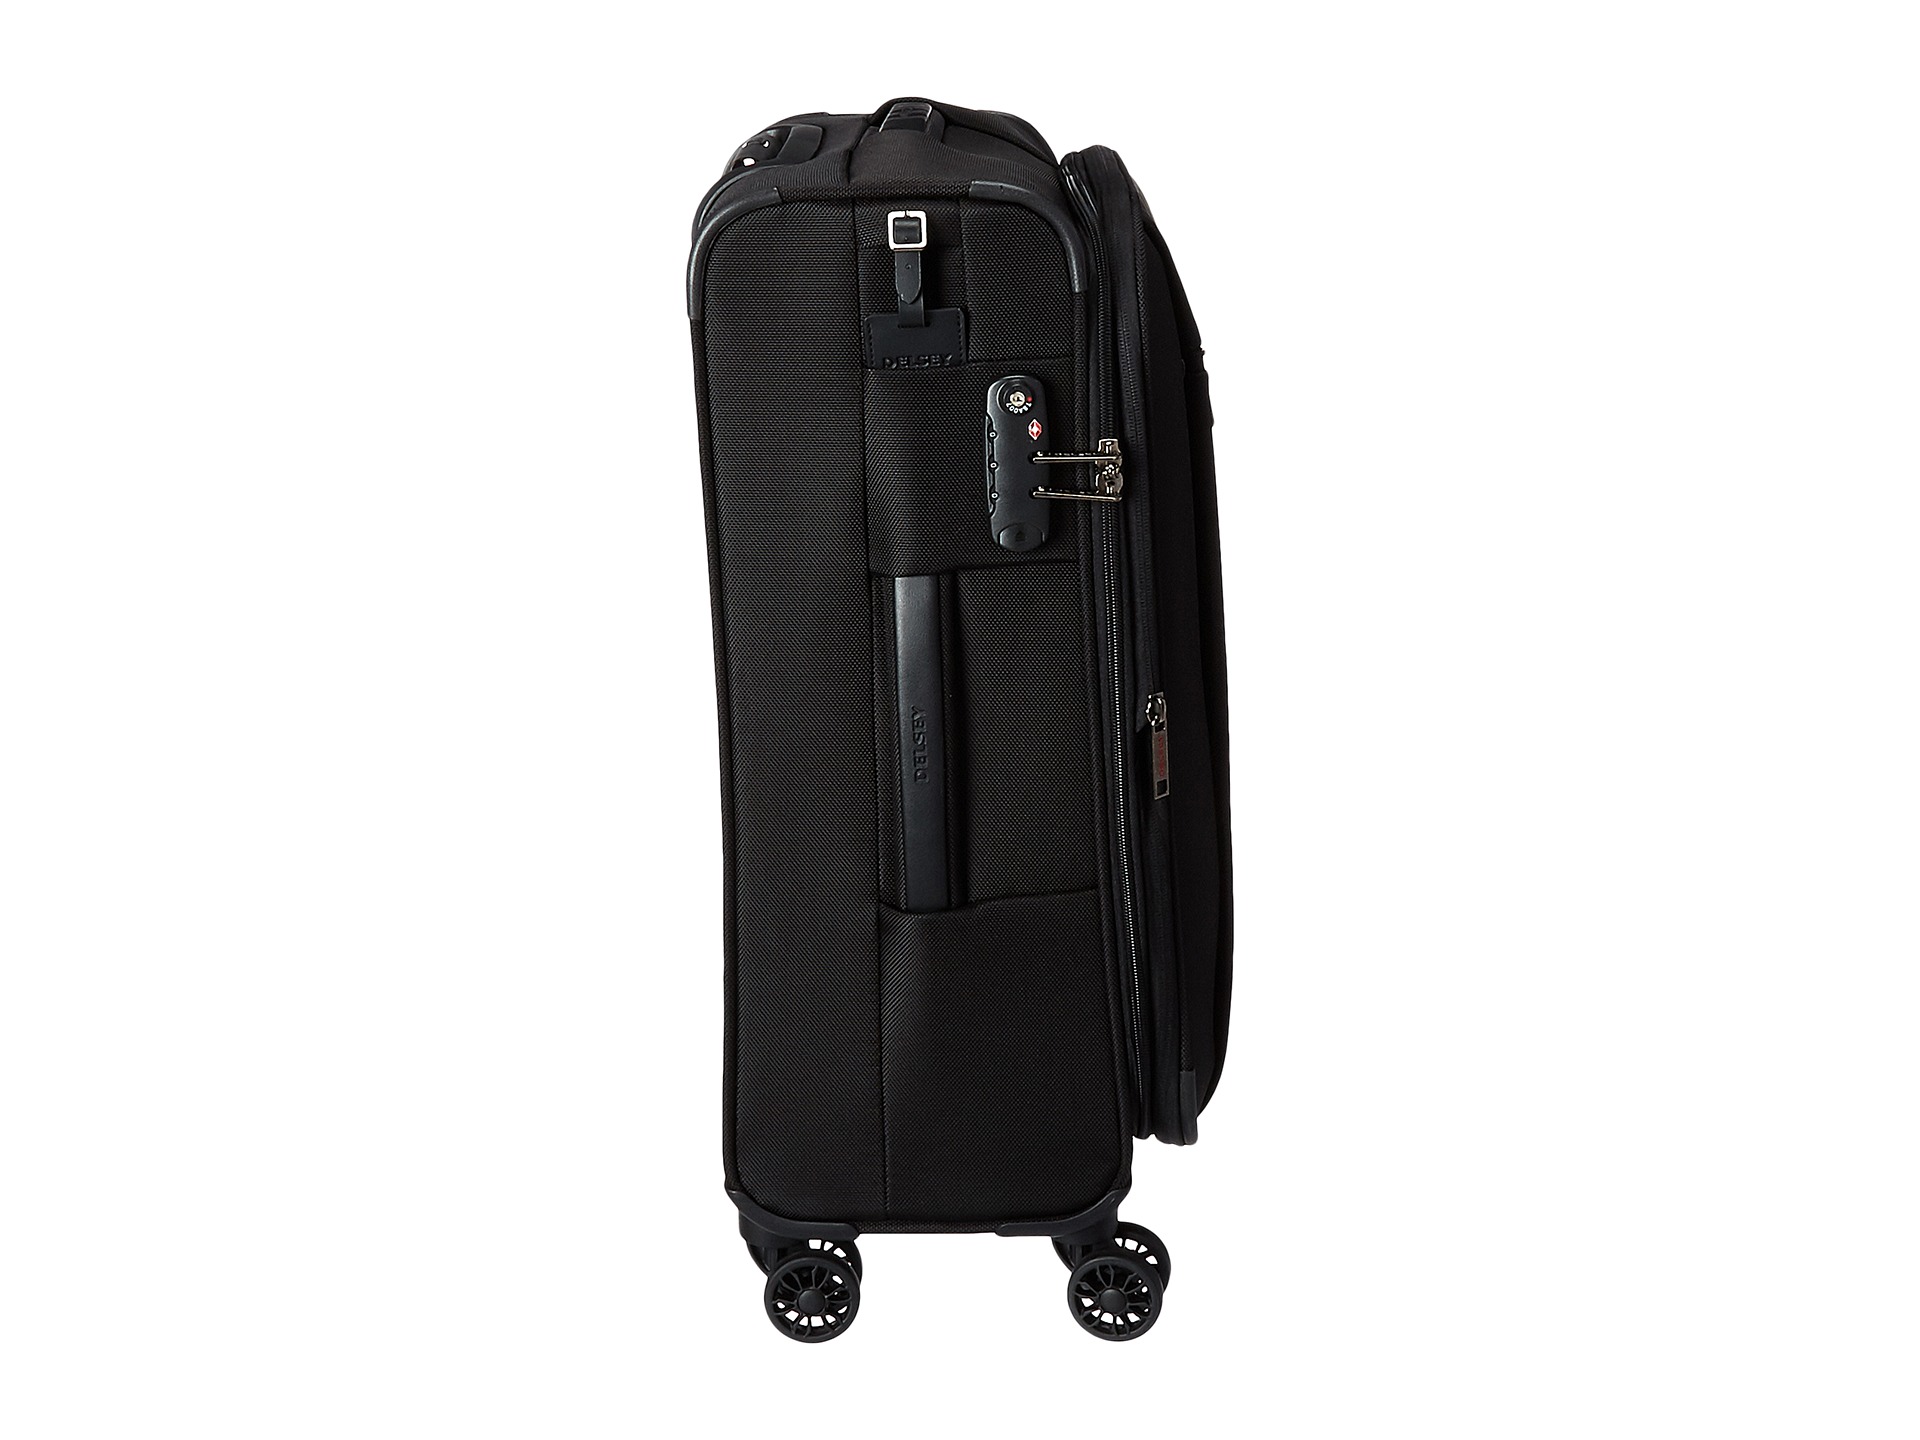 Delsey Montmartre Carry-On Expandable Spinner Trolley at Zappos.com